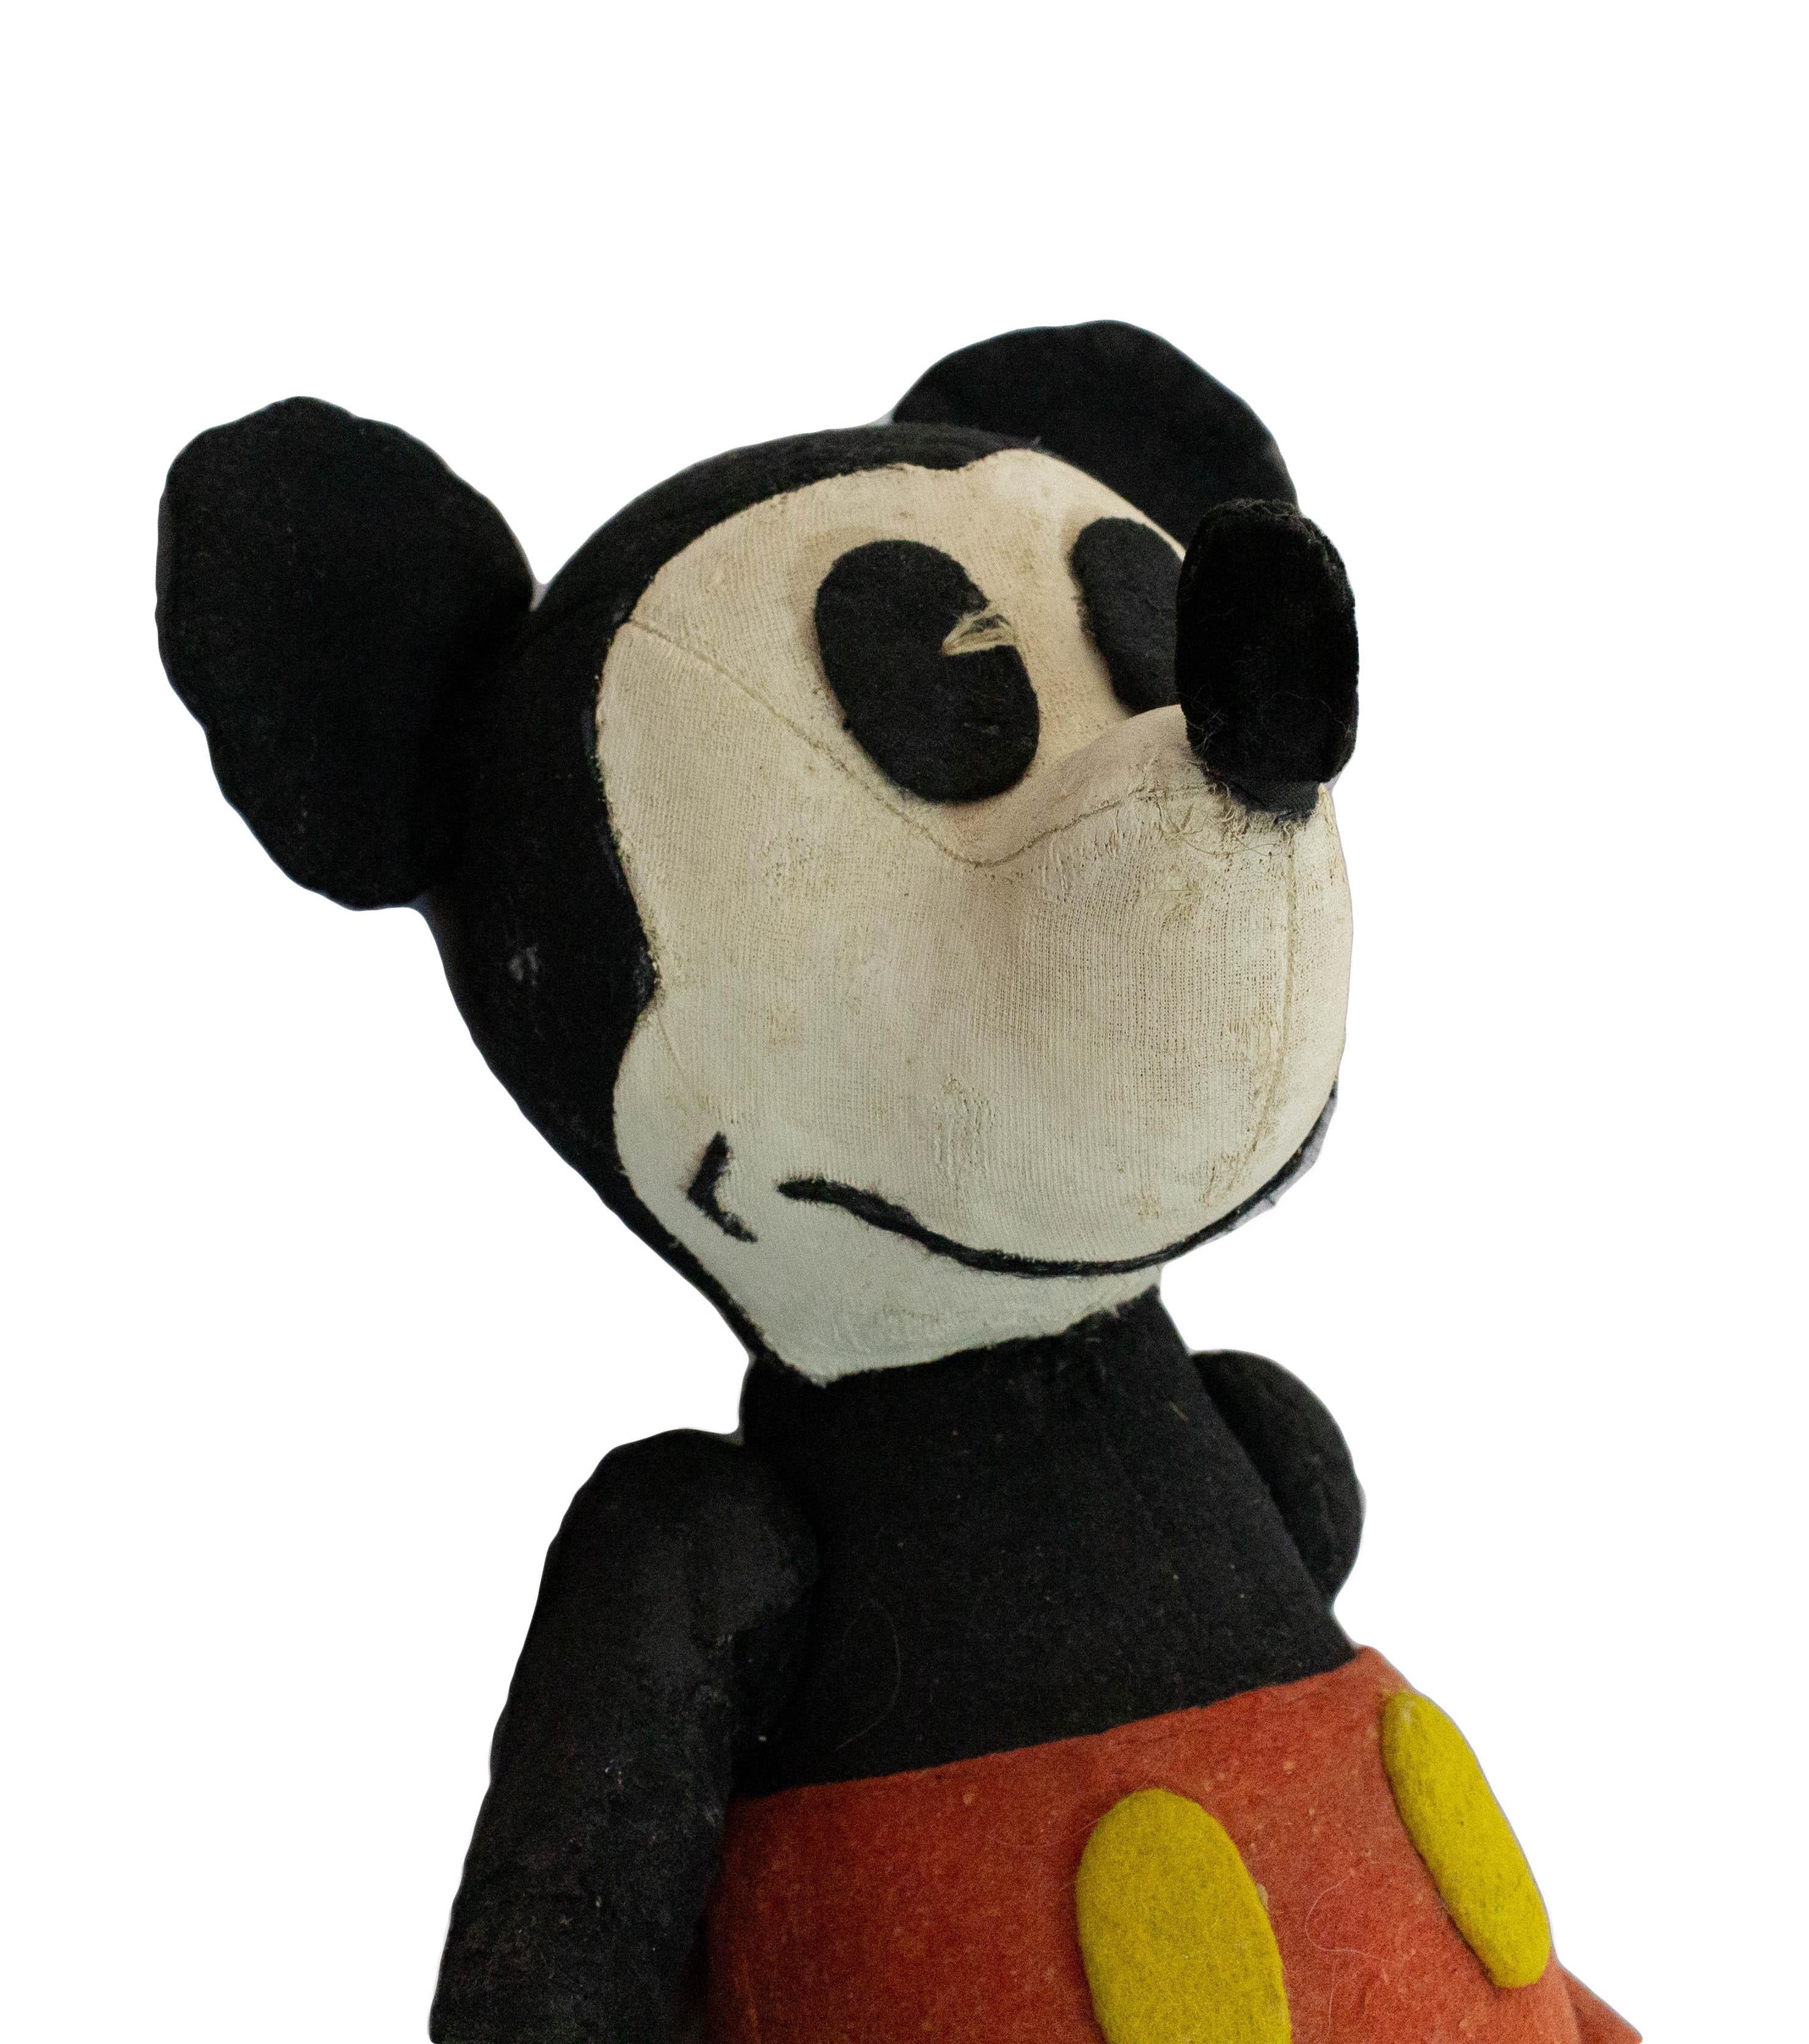 Mickey mouse stuffed felt children toy, 1930
Vintage condition, so does has traces of age and use, so do view all pictures well.

for shipping :
19x22x45